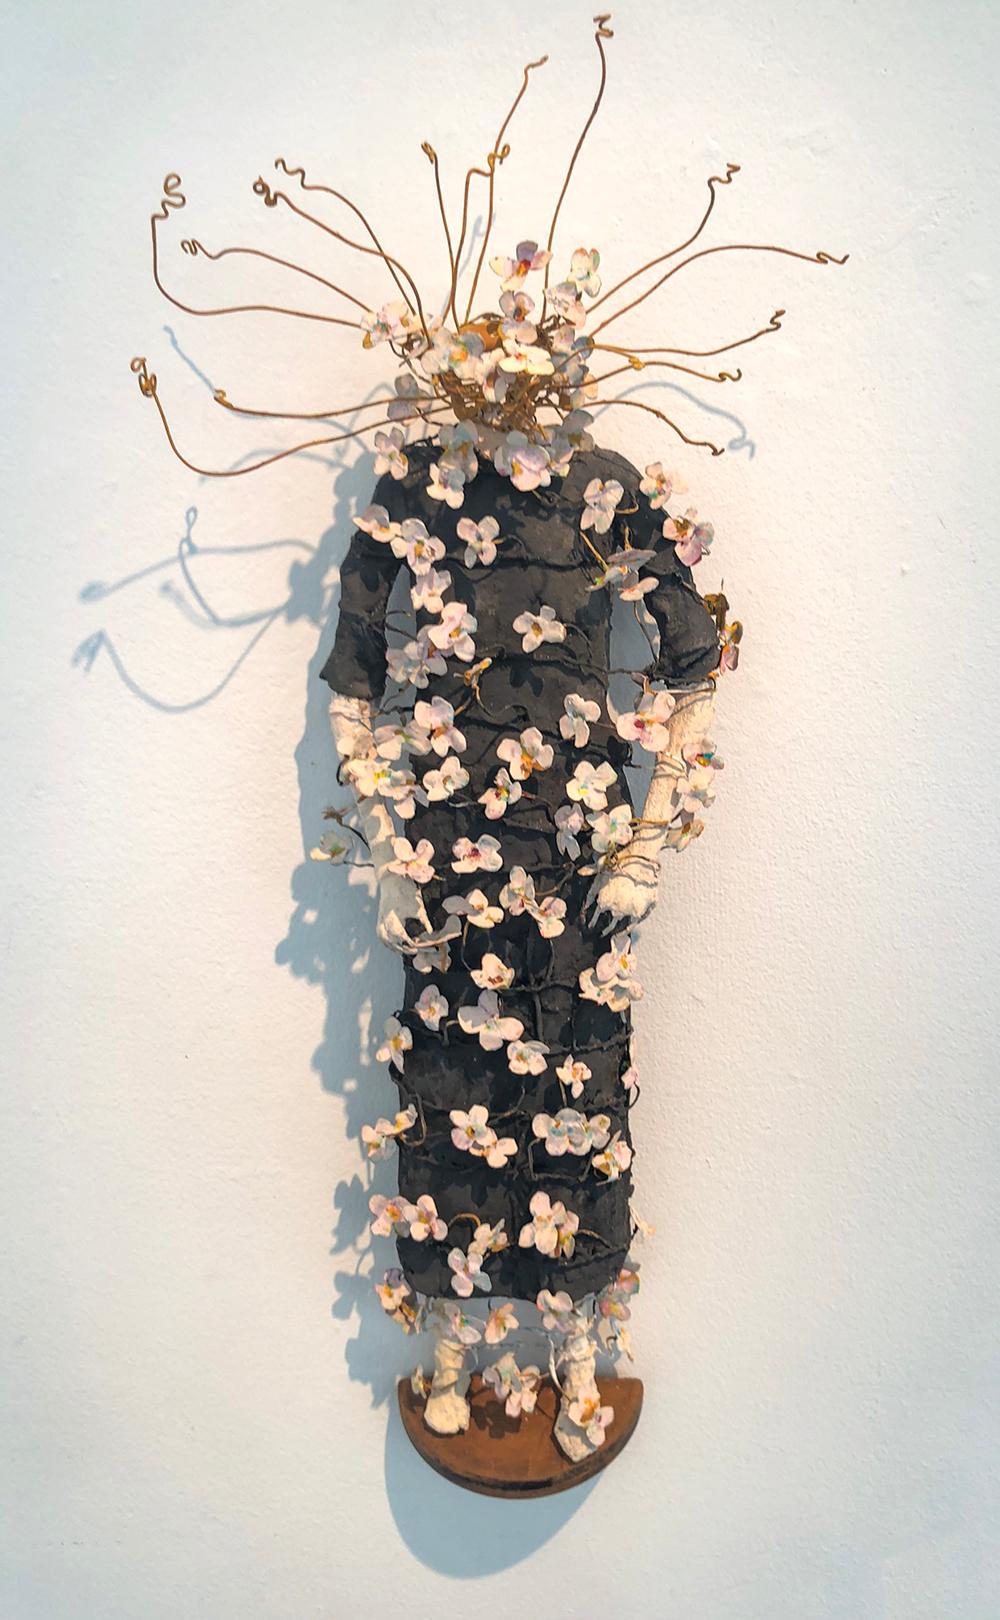 Dressed in Wildflowers and Furrow Weeds - Sculpture by Johan Hagaman